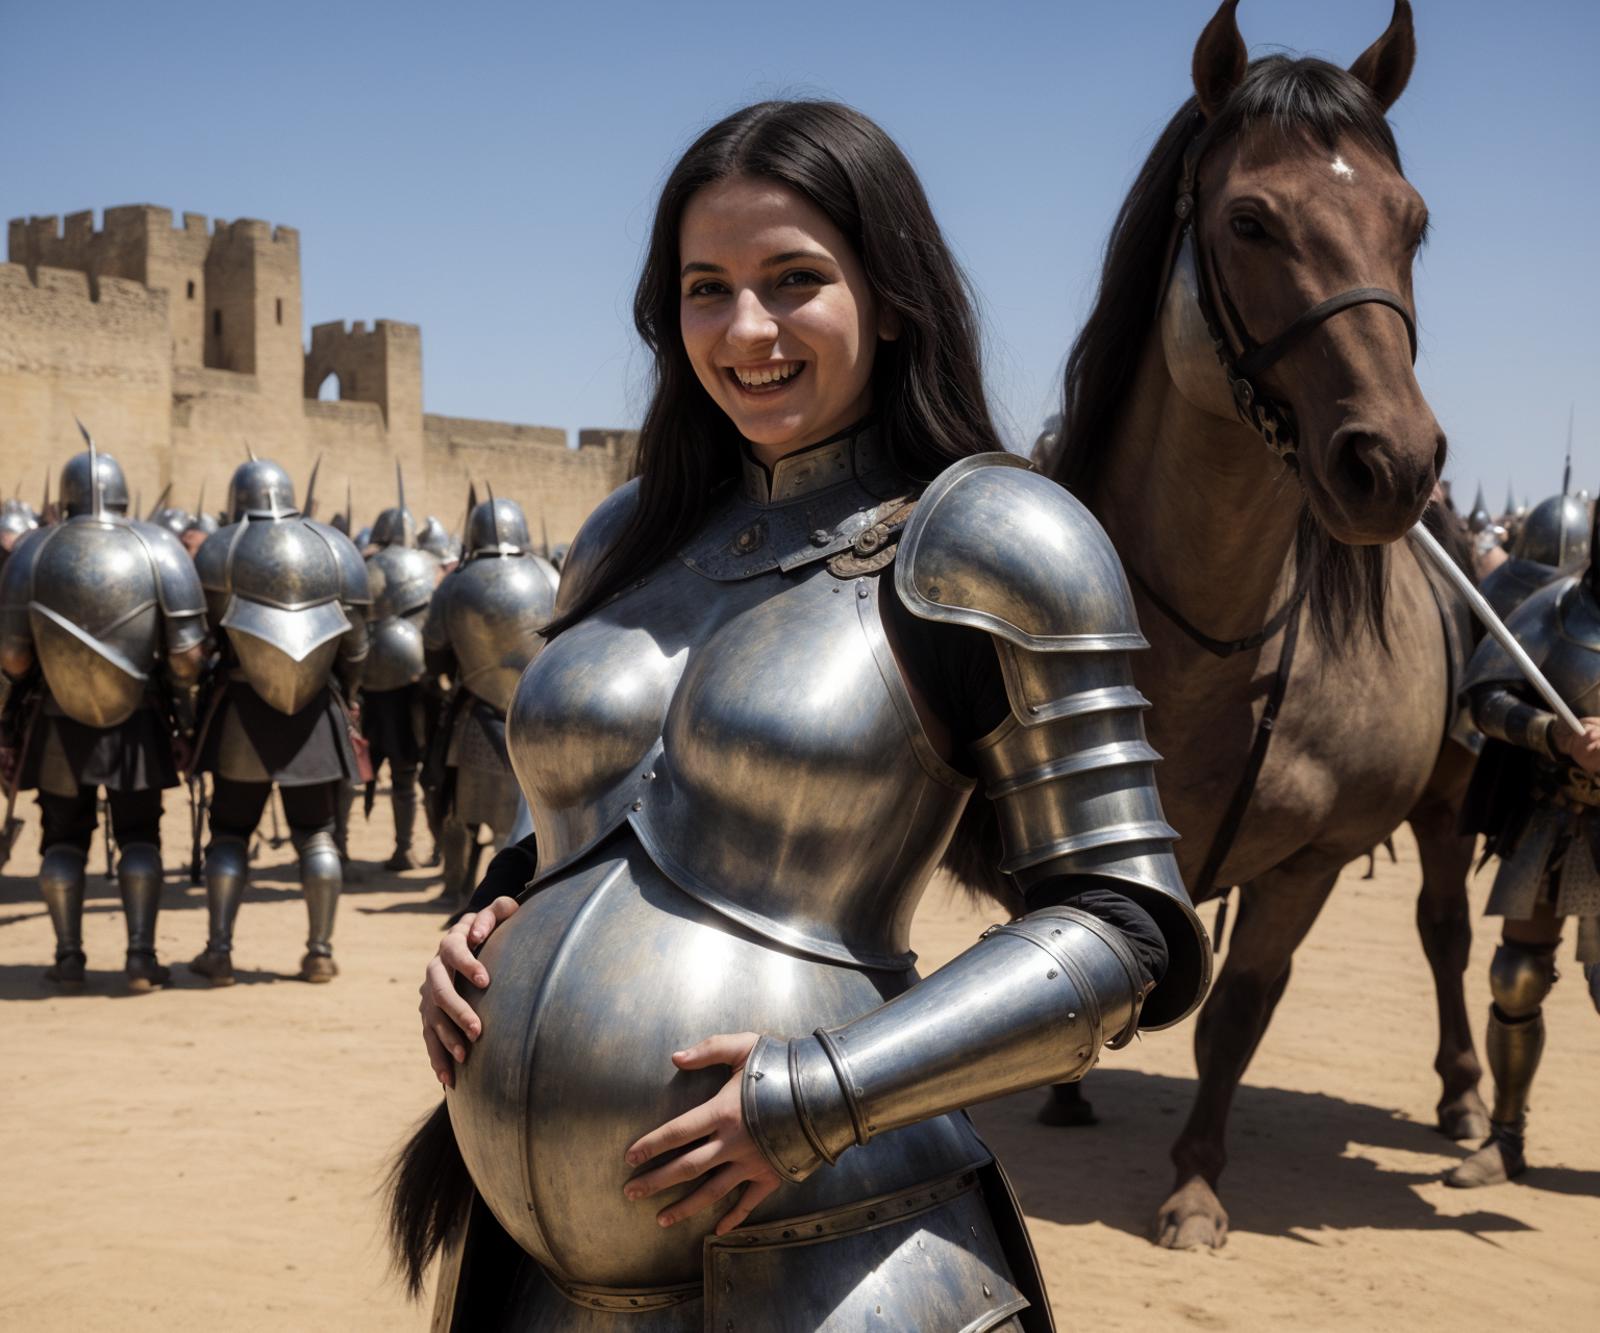 A pregnant woman in a metal costume posing with a horse.